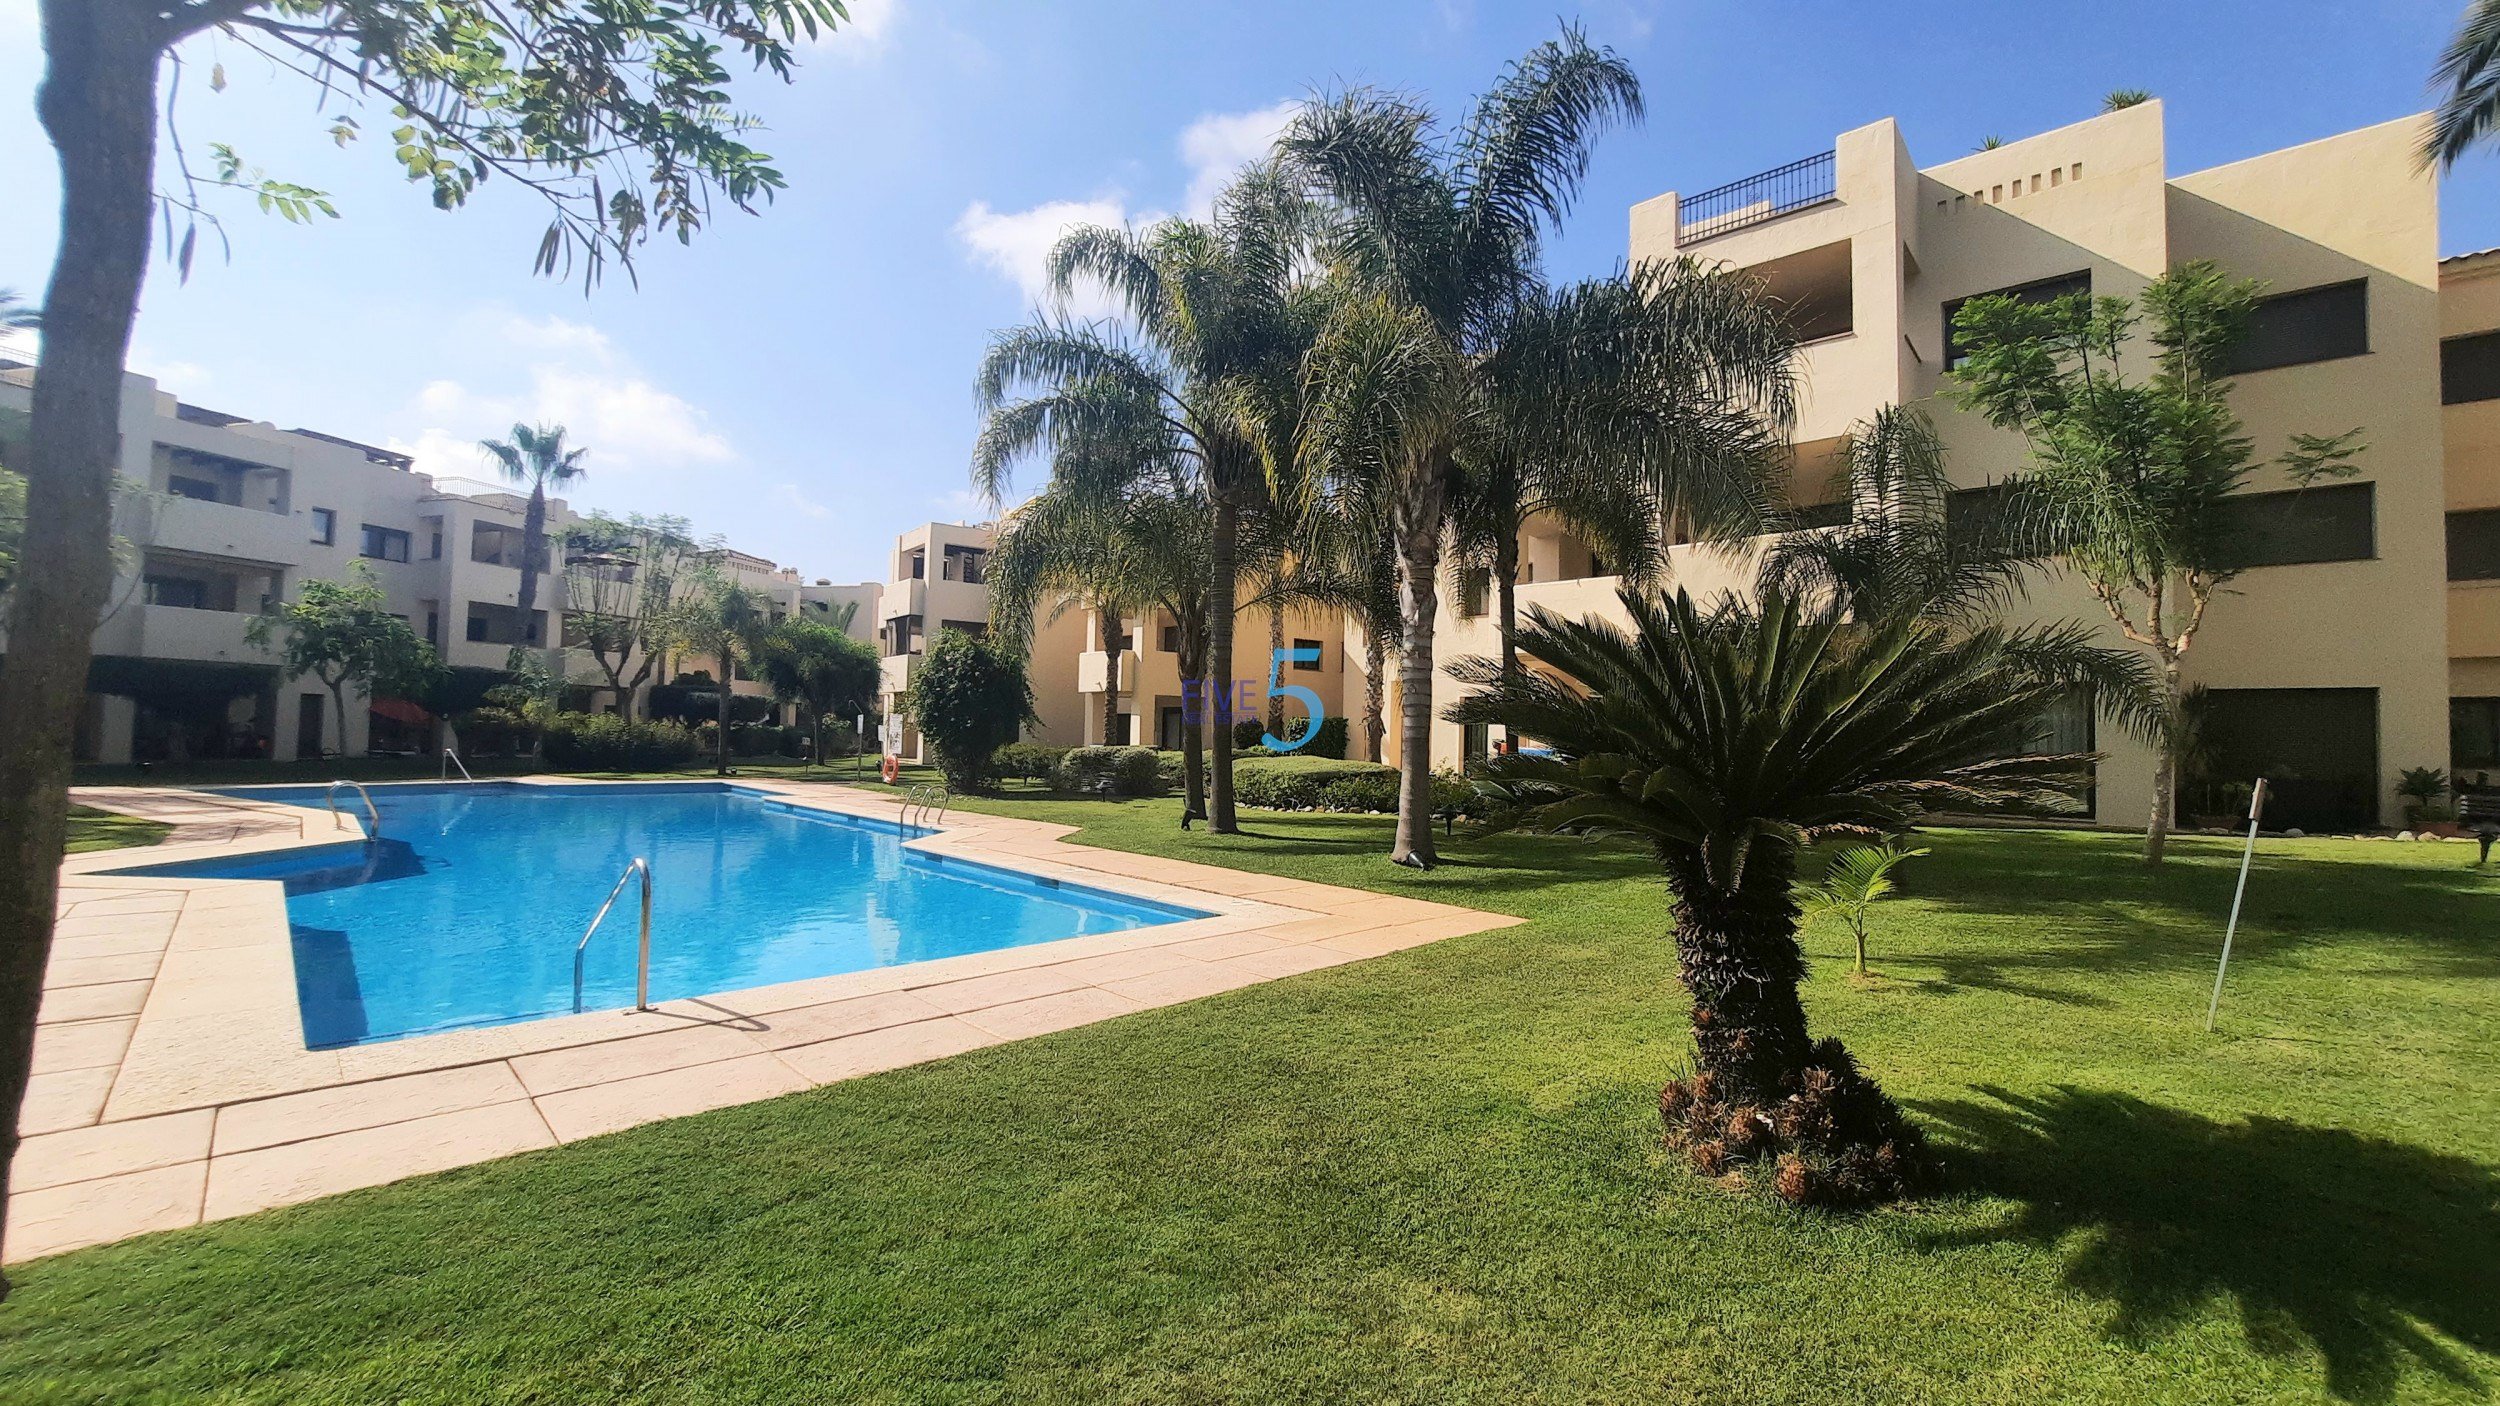 Apartment for sale in San Pedro del Pinatar and San Javier 30